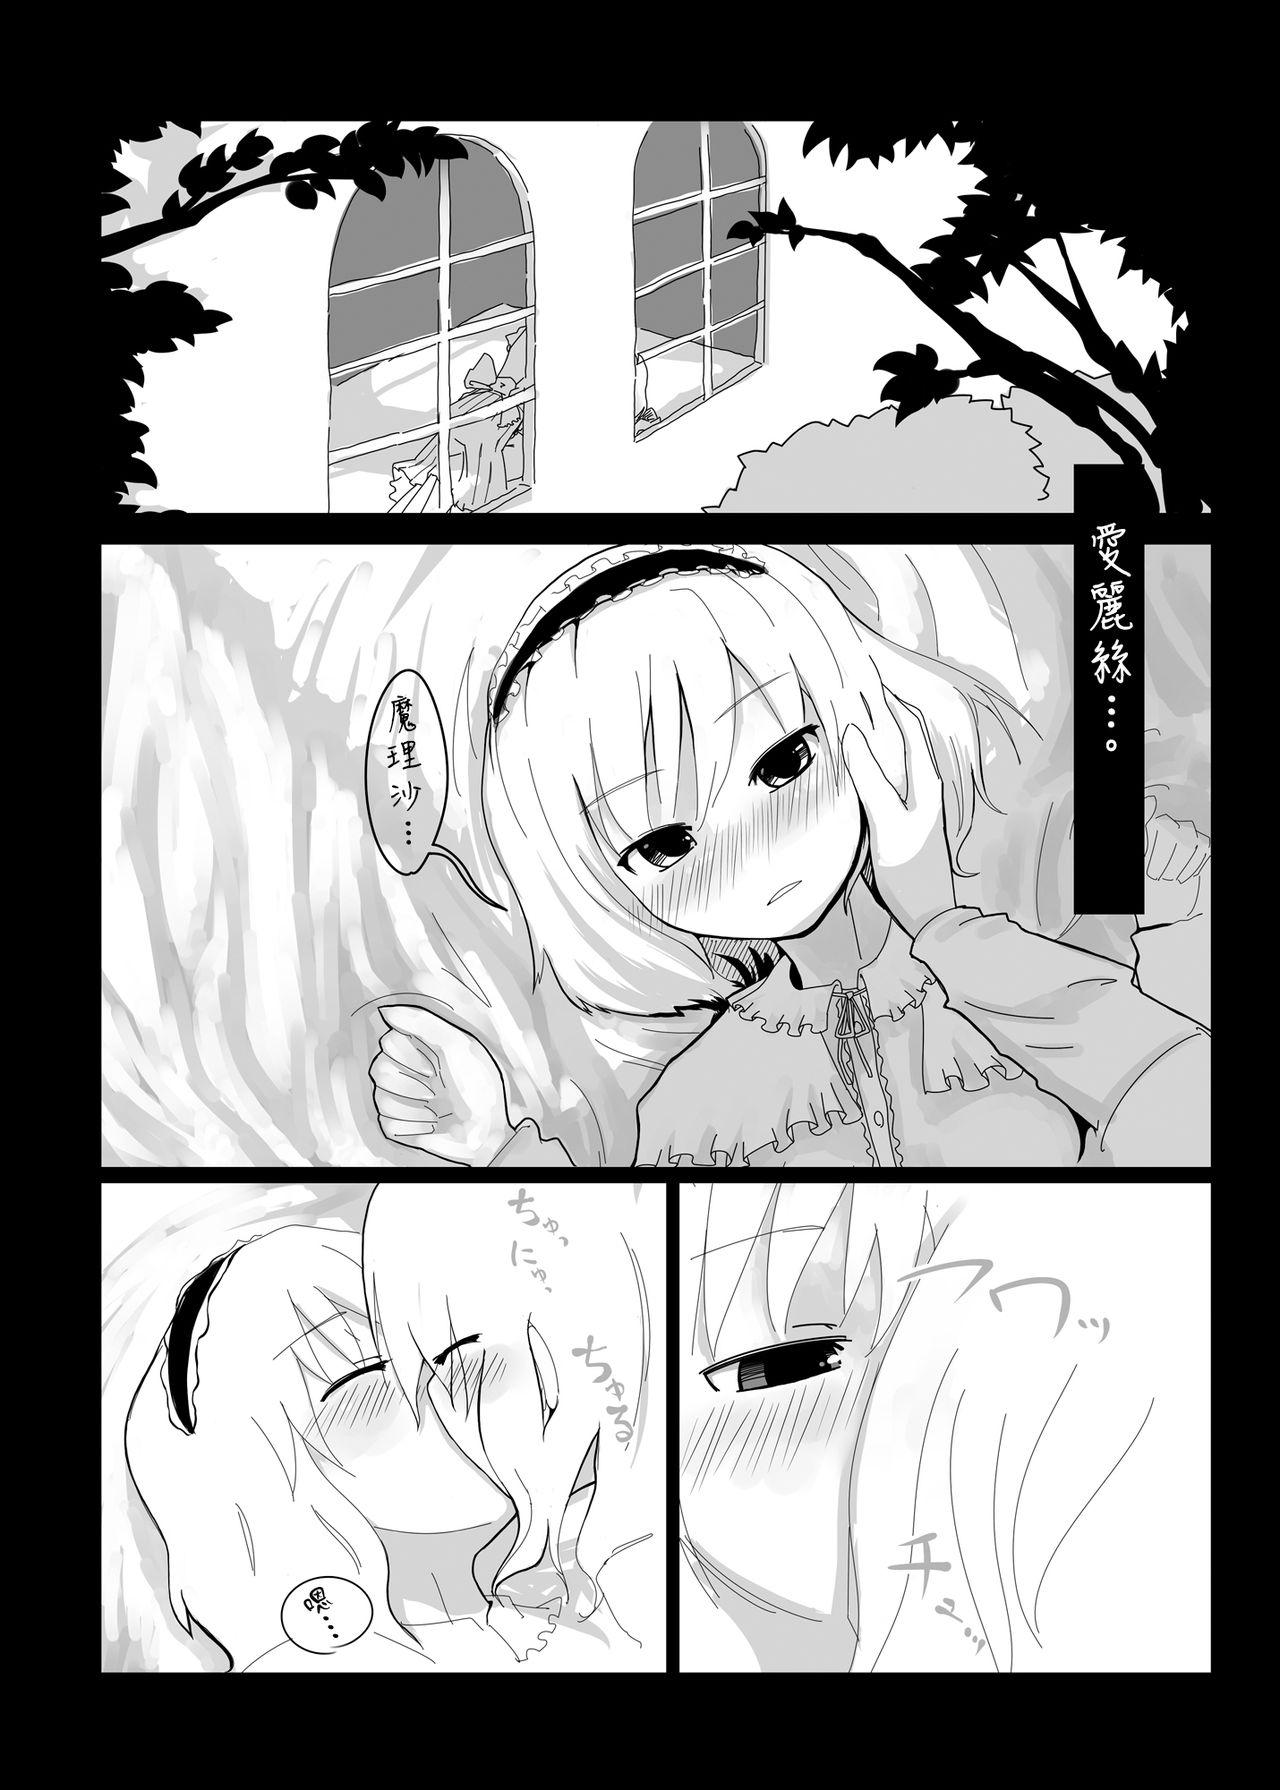 Interracial Touhou Ero Atsume. - Touhou project Massages - Page 6